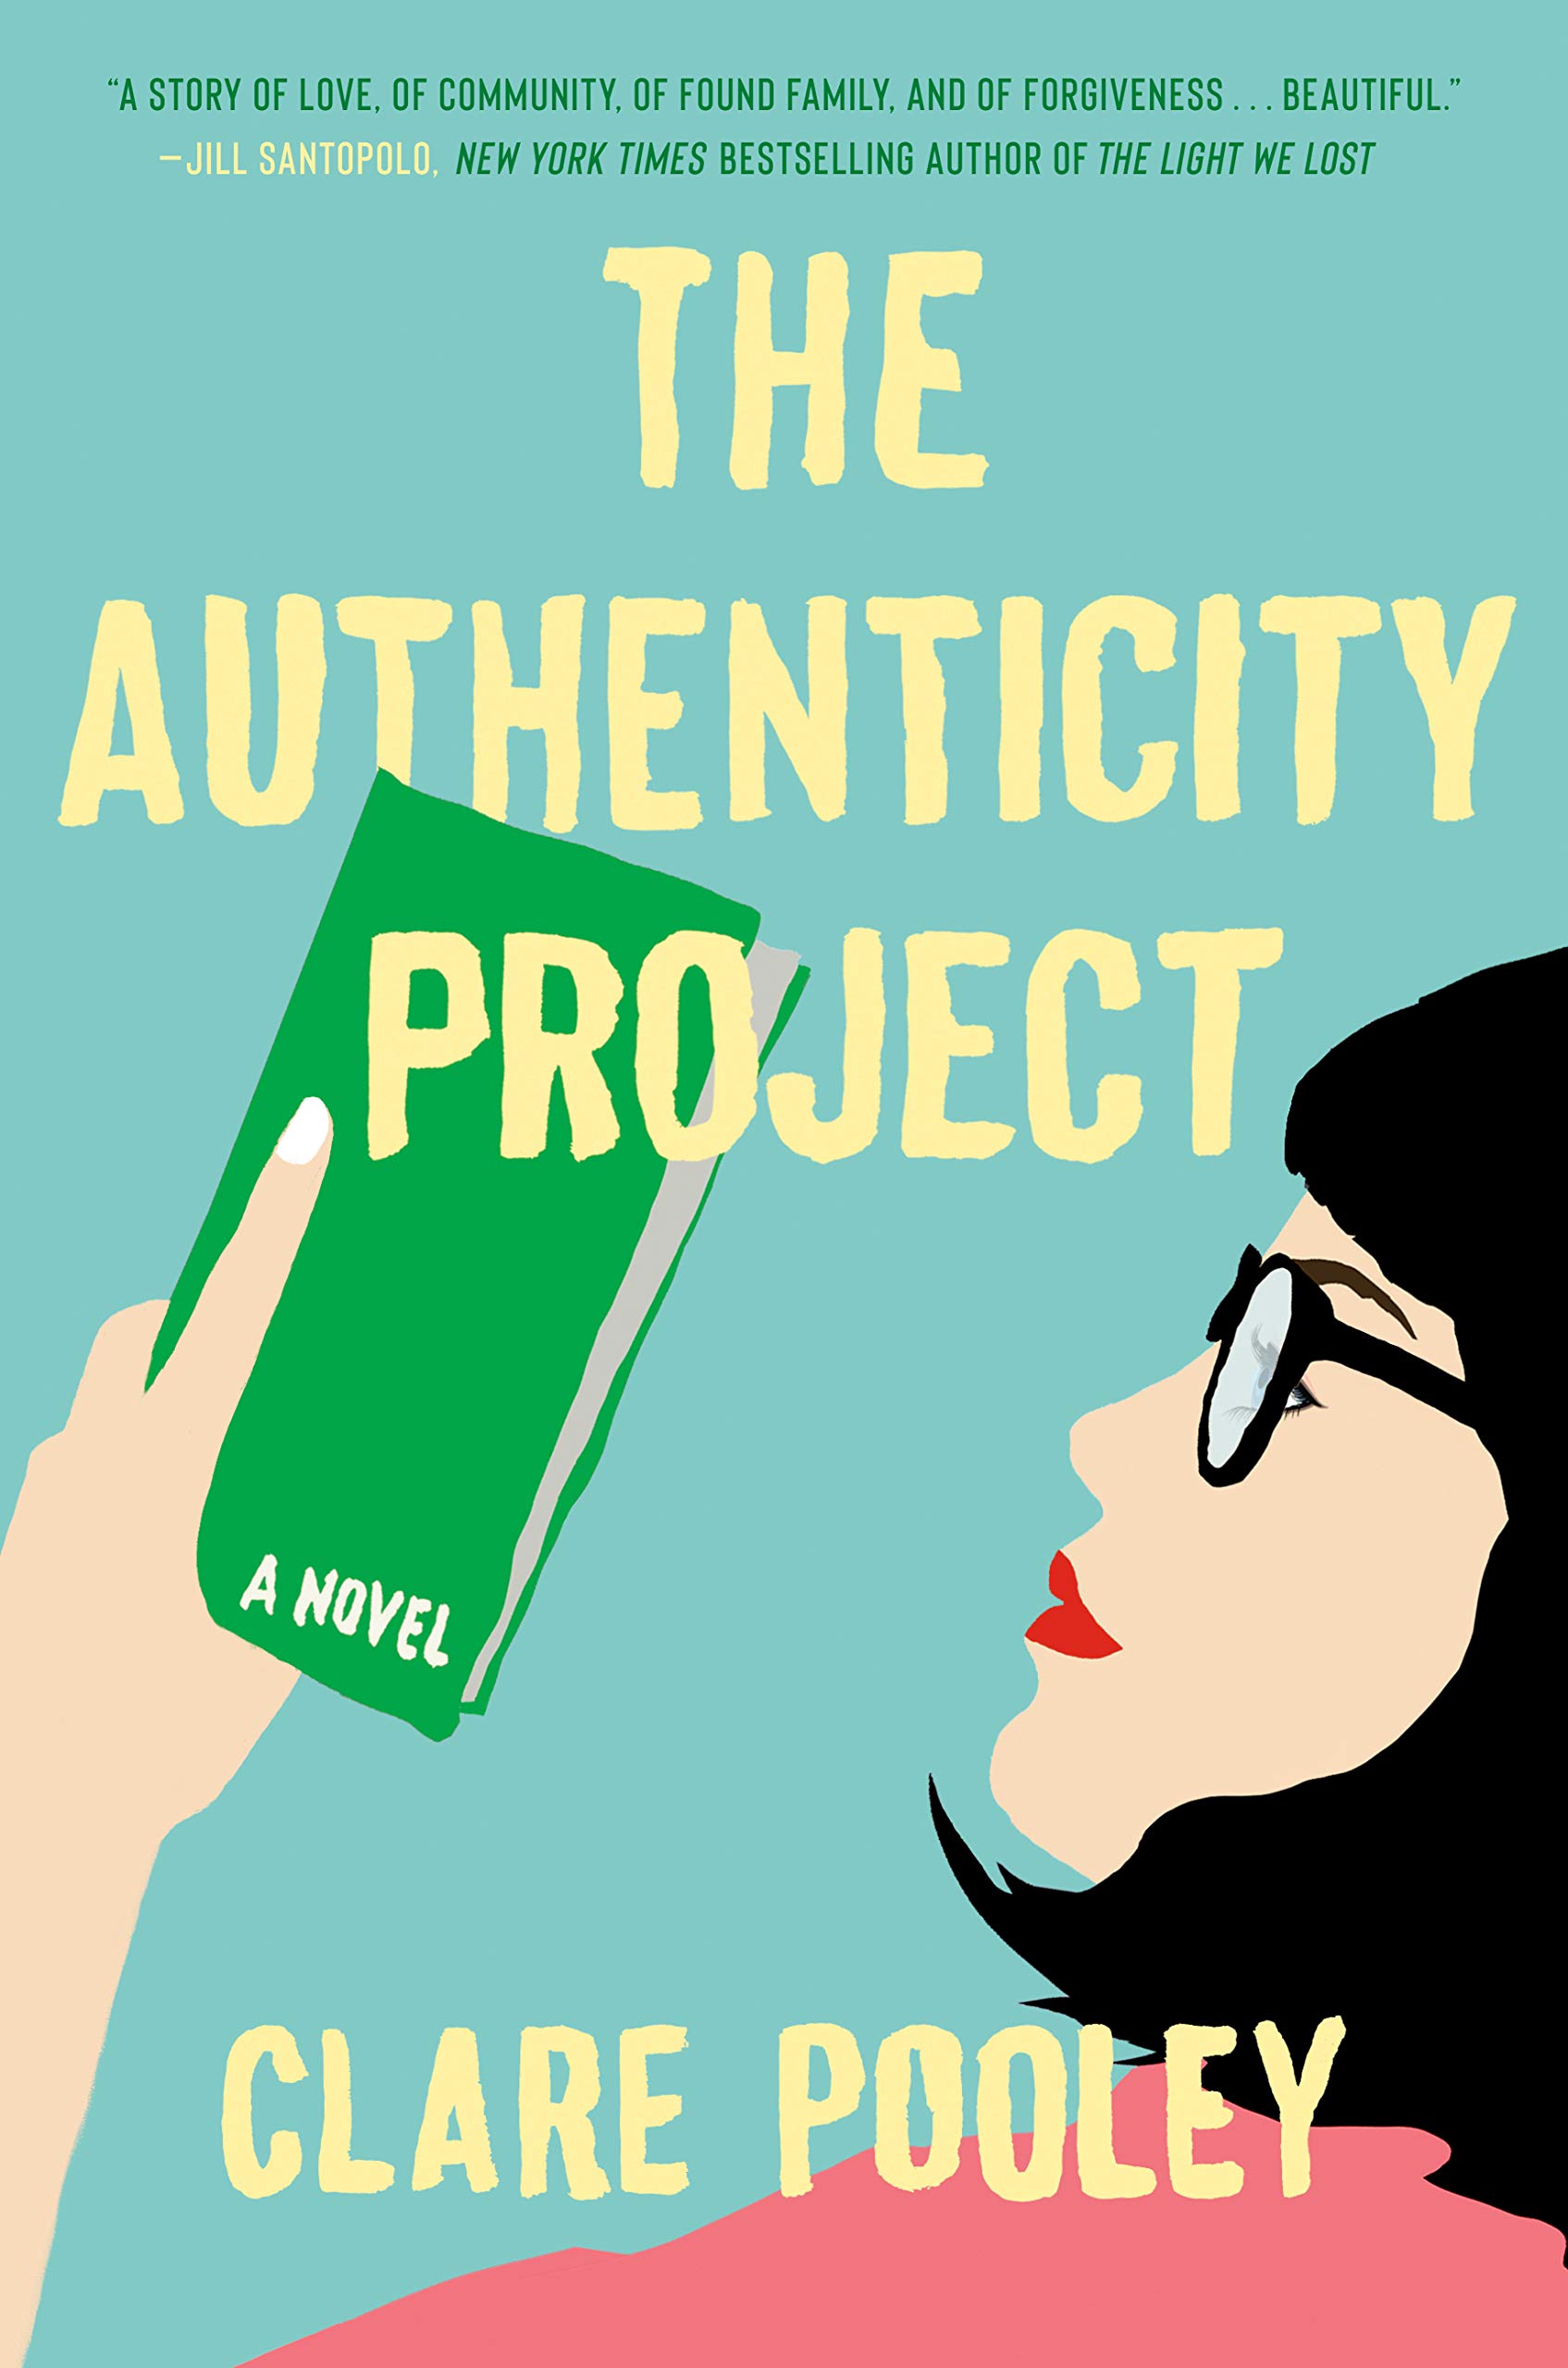 Image for "The Authenticity Project"